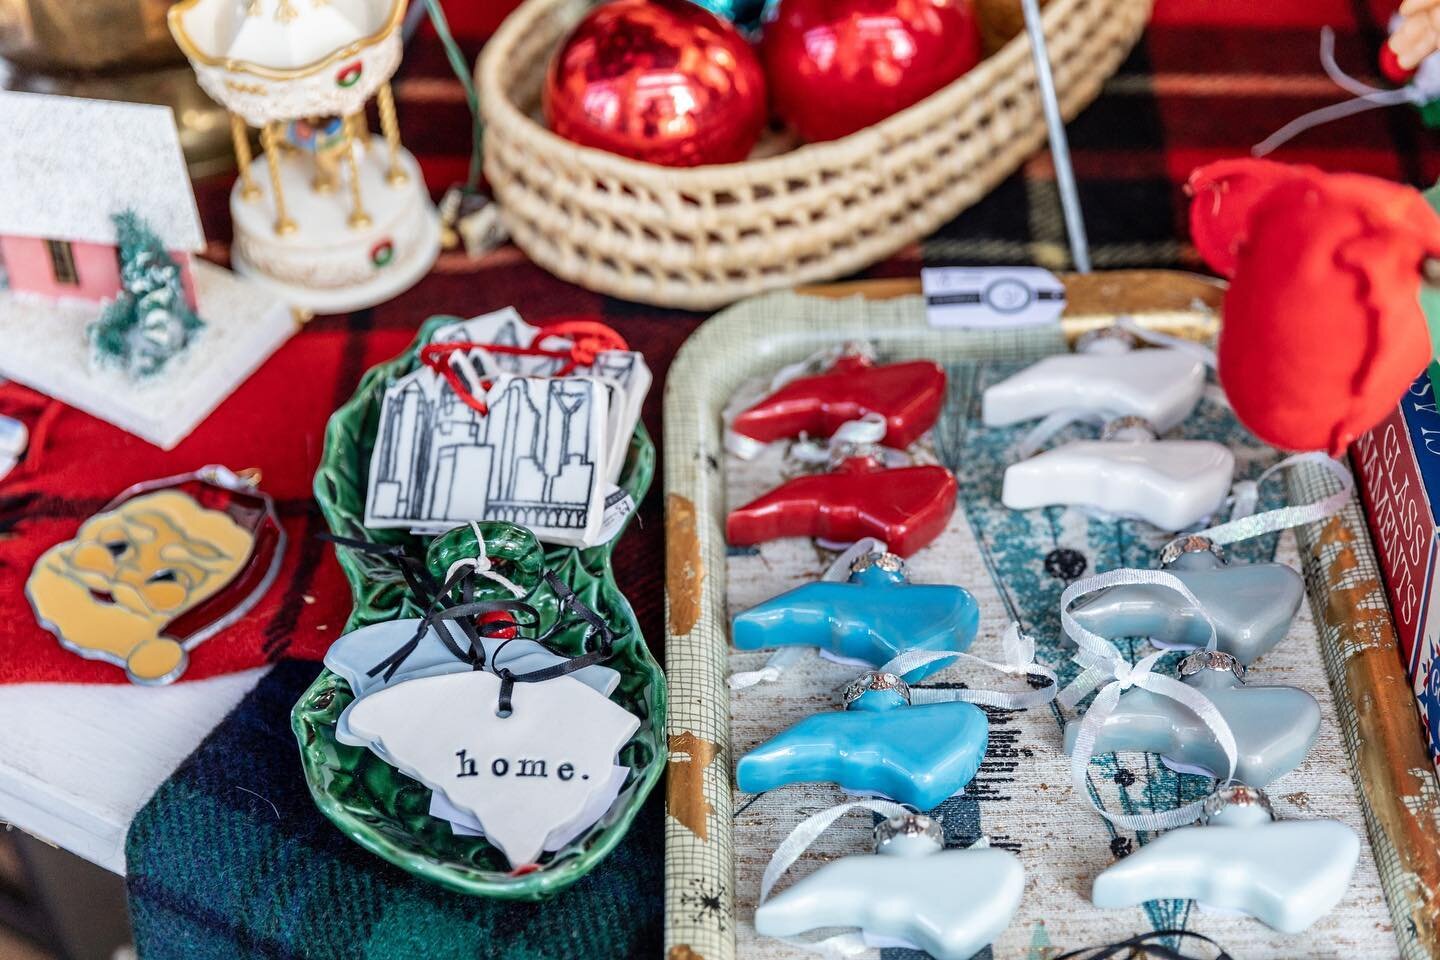 Get your holiday shopping done in one fell swoop at @vtgclt POP in @metropolitanclt! Find this magical shop filled with 90+ local/regional vendors in front of Hickory Tavern. Happy Gifting! XOXO
Photo: @laurasumrak 
Styled by: @studiocultivate
#vtgcl